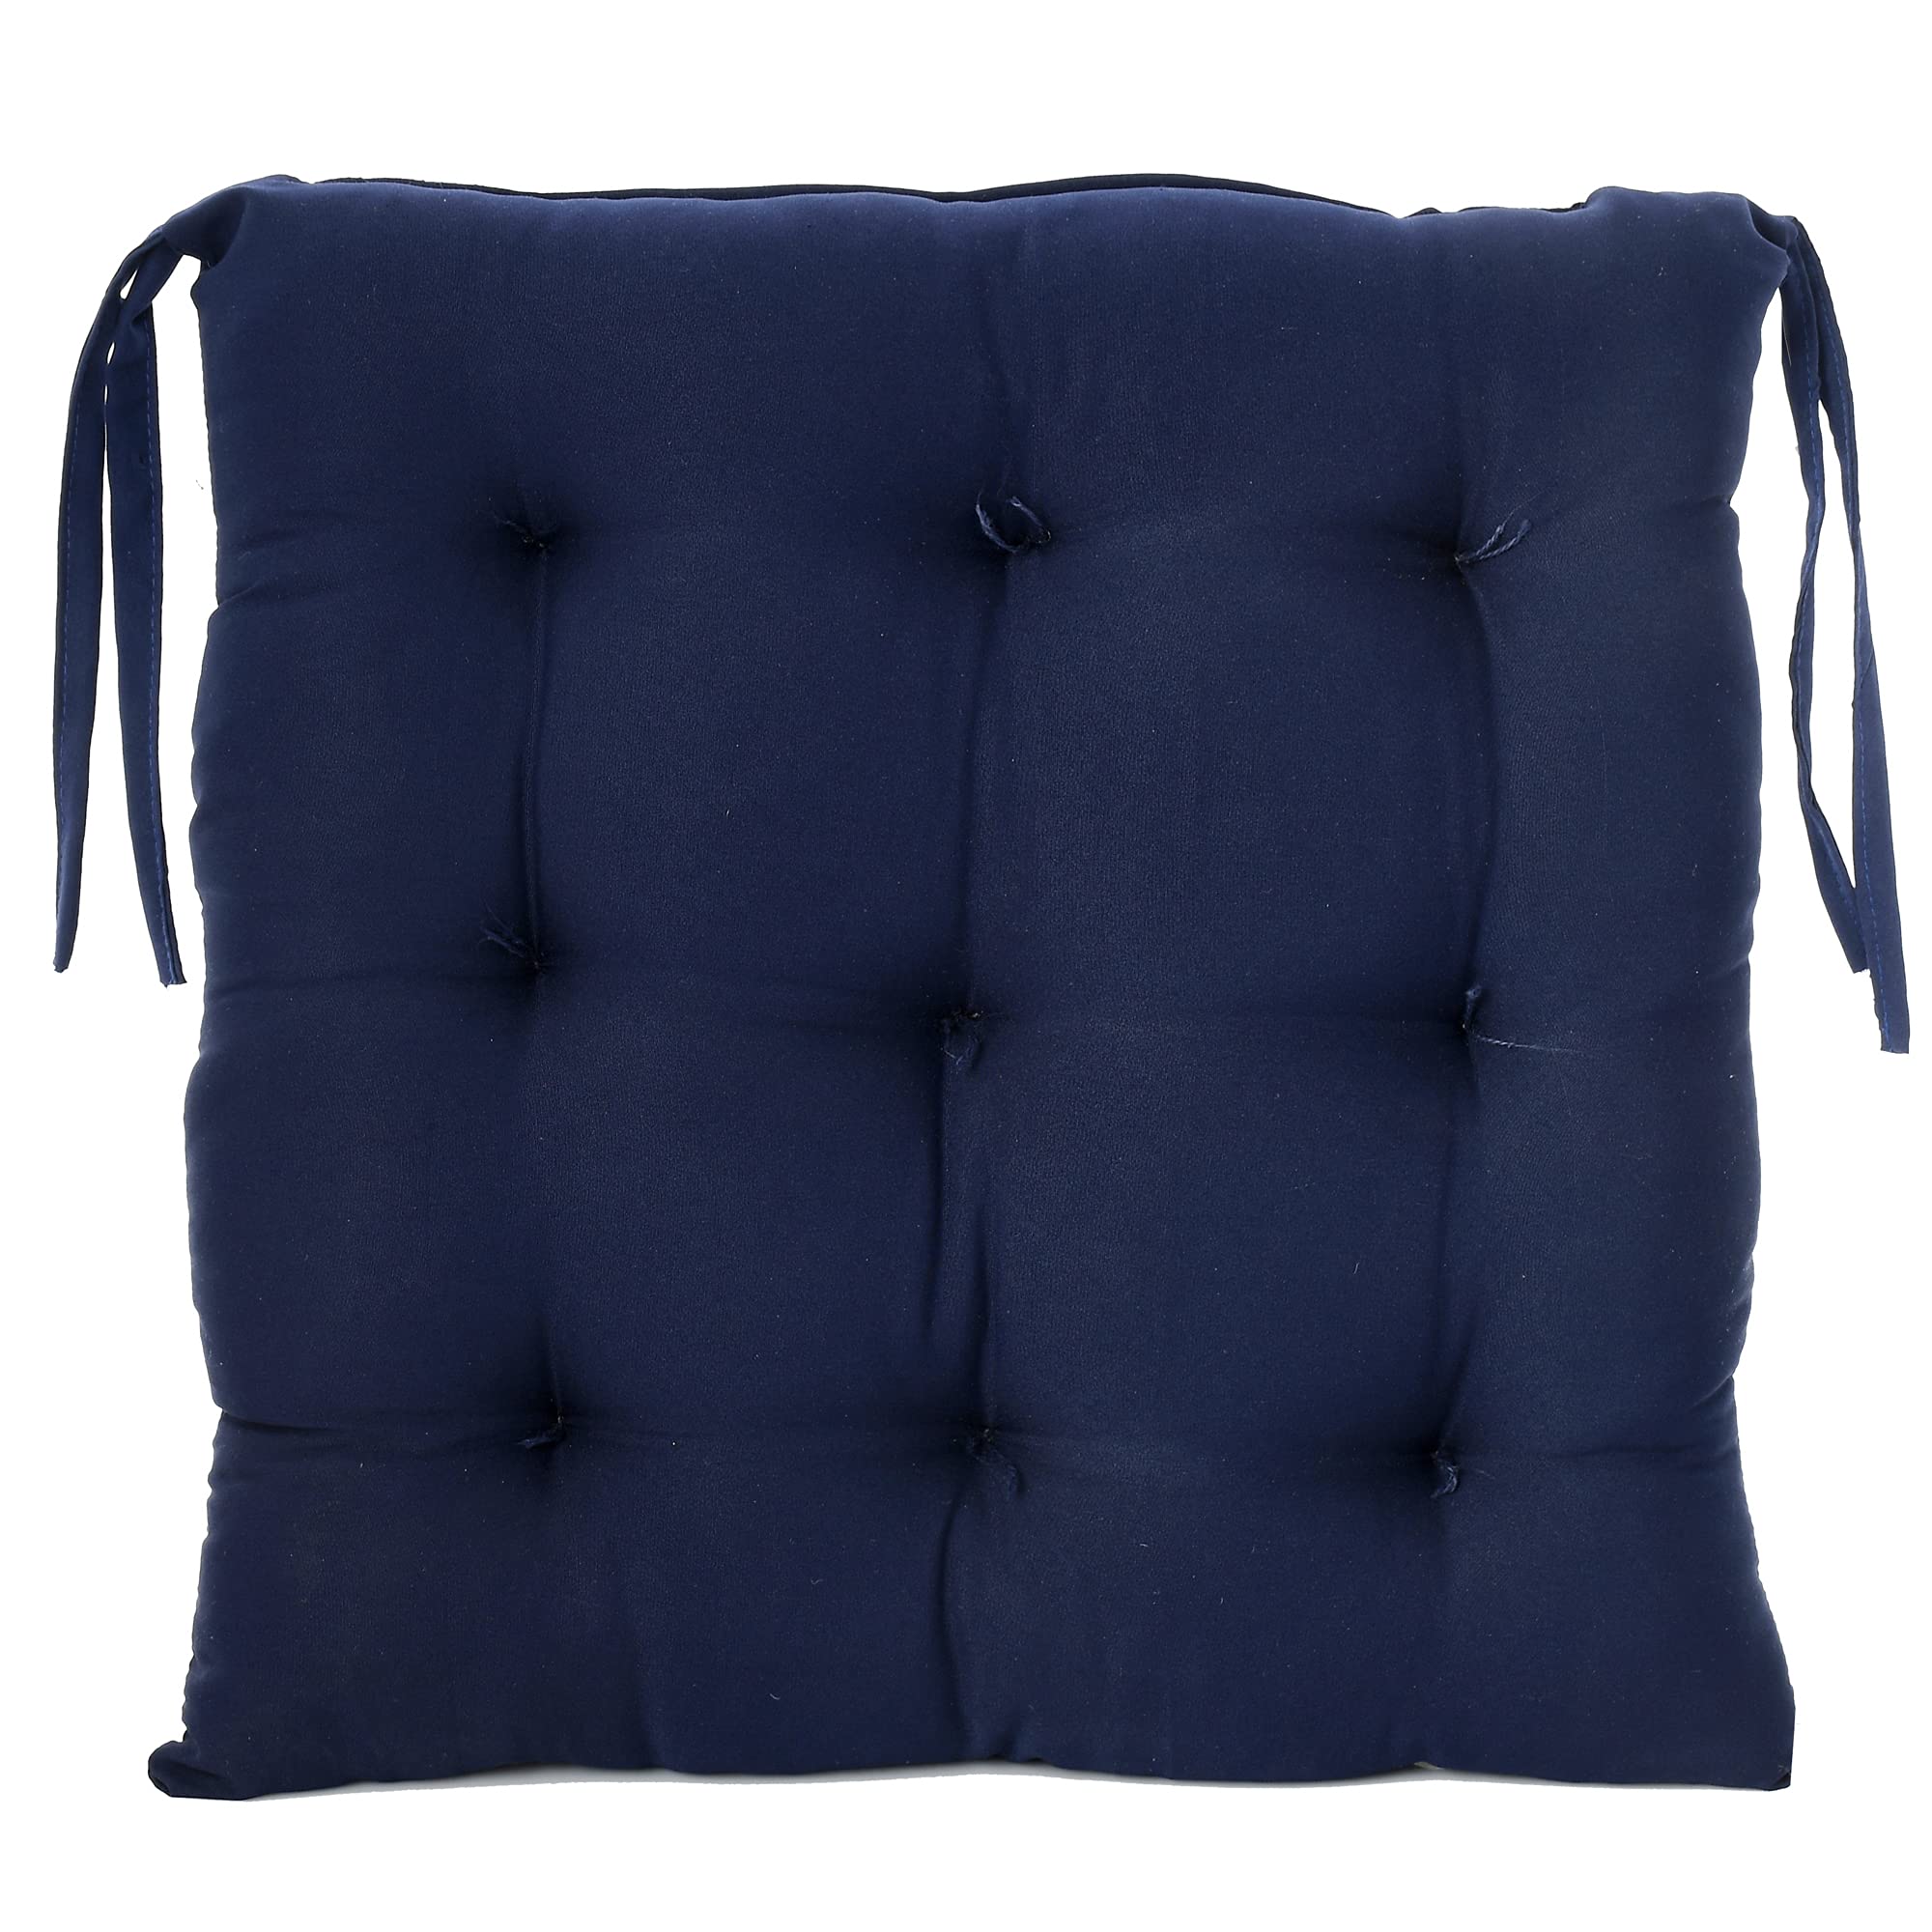 Kuber Industries Chair Pad|Chair Cushion Pad|Chair Cushion |Quilted Microfiber Fabric & Solid Color|Soft & Comfortable Sitting|Pack of 2 (Navy Blue)